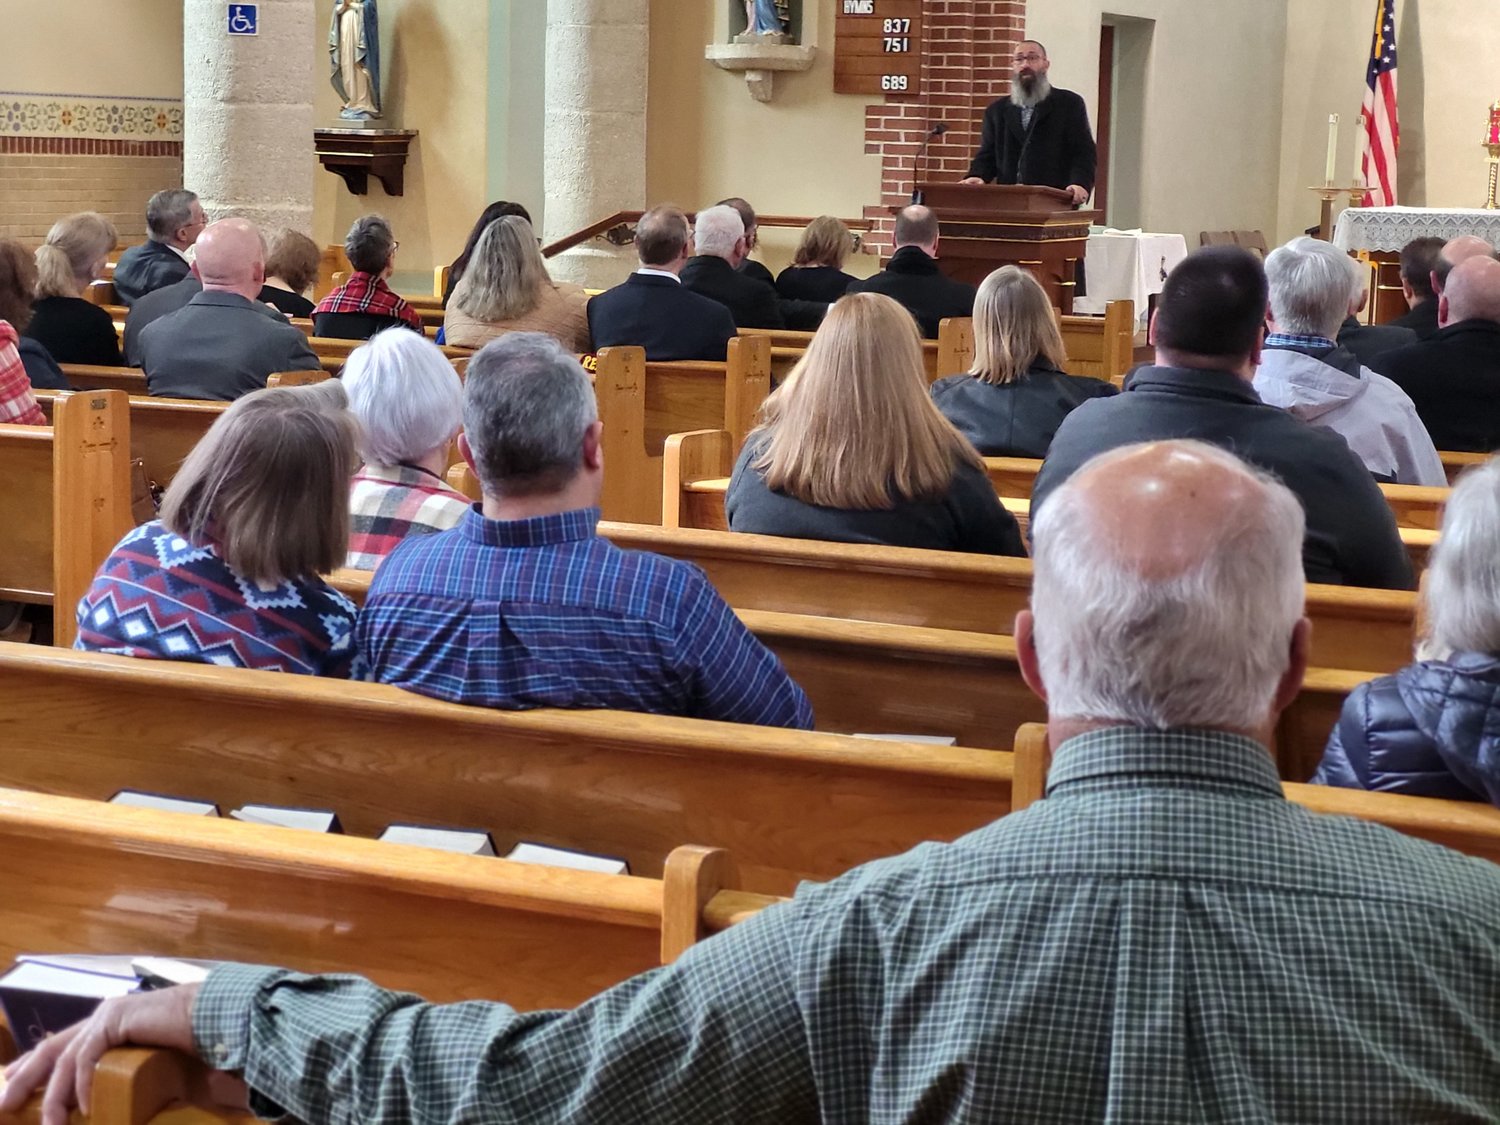 Rami Salfiti, a lifetime resident of the Old City portion of Jerusalem, speaks to members of the Equestrian Order of the Holy Sepulchre of Jerusalem about the situation facing Christians in the Holy Land, on Feb. 5 in St. Stanislaus Church in Wardsville.